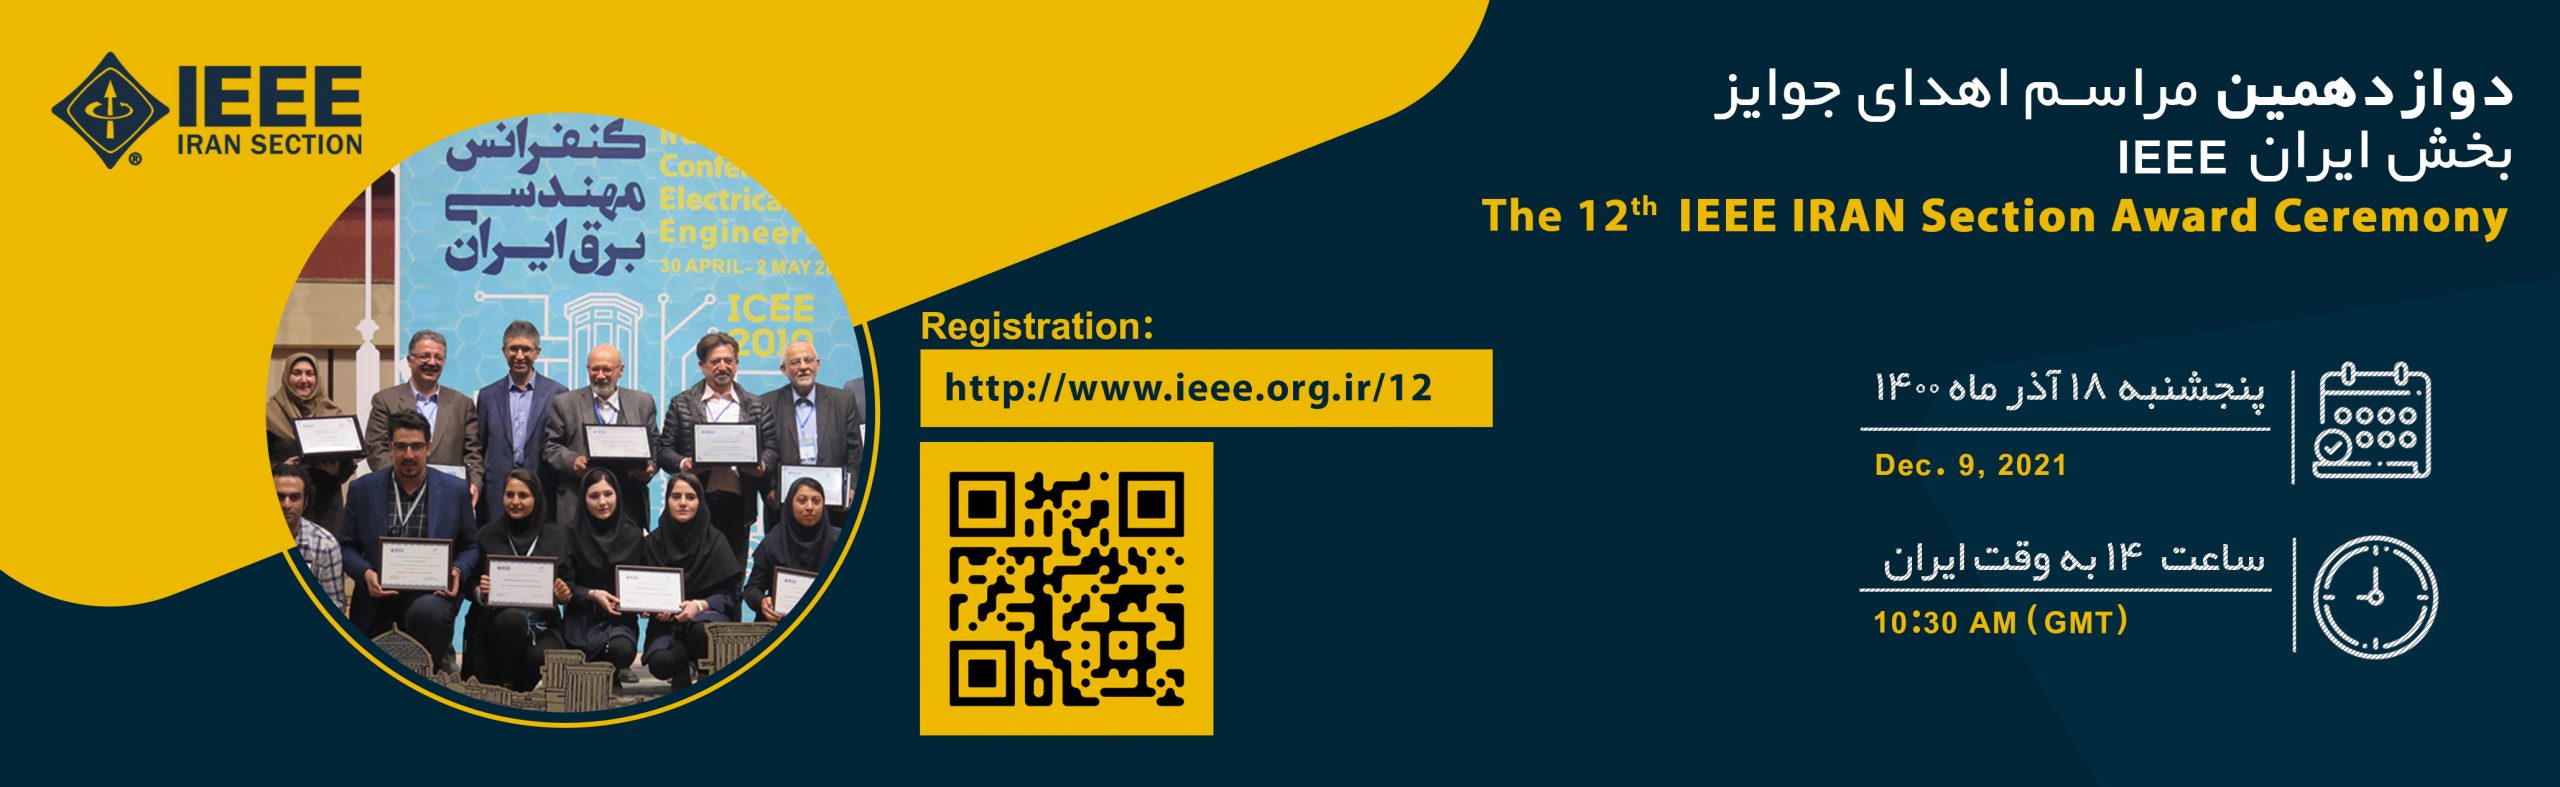 The 12th IEEE Iran Section Awards Ceremony